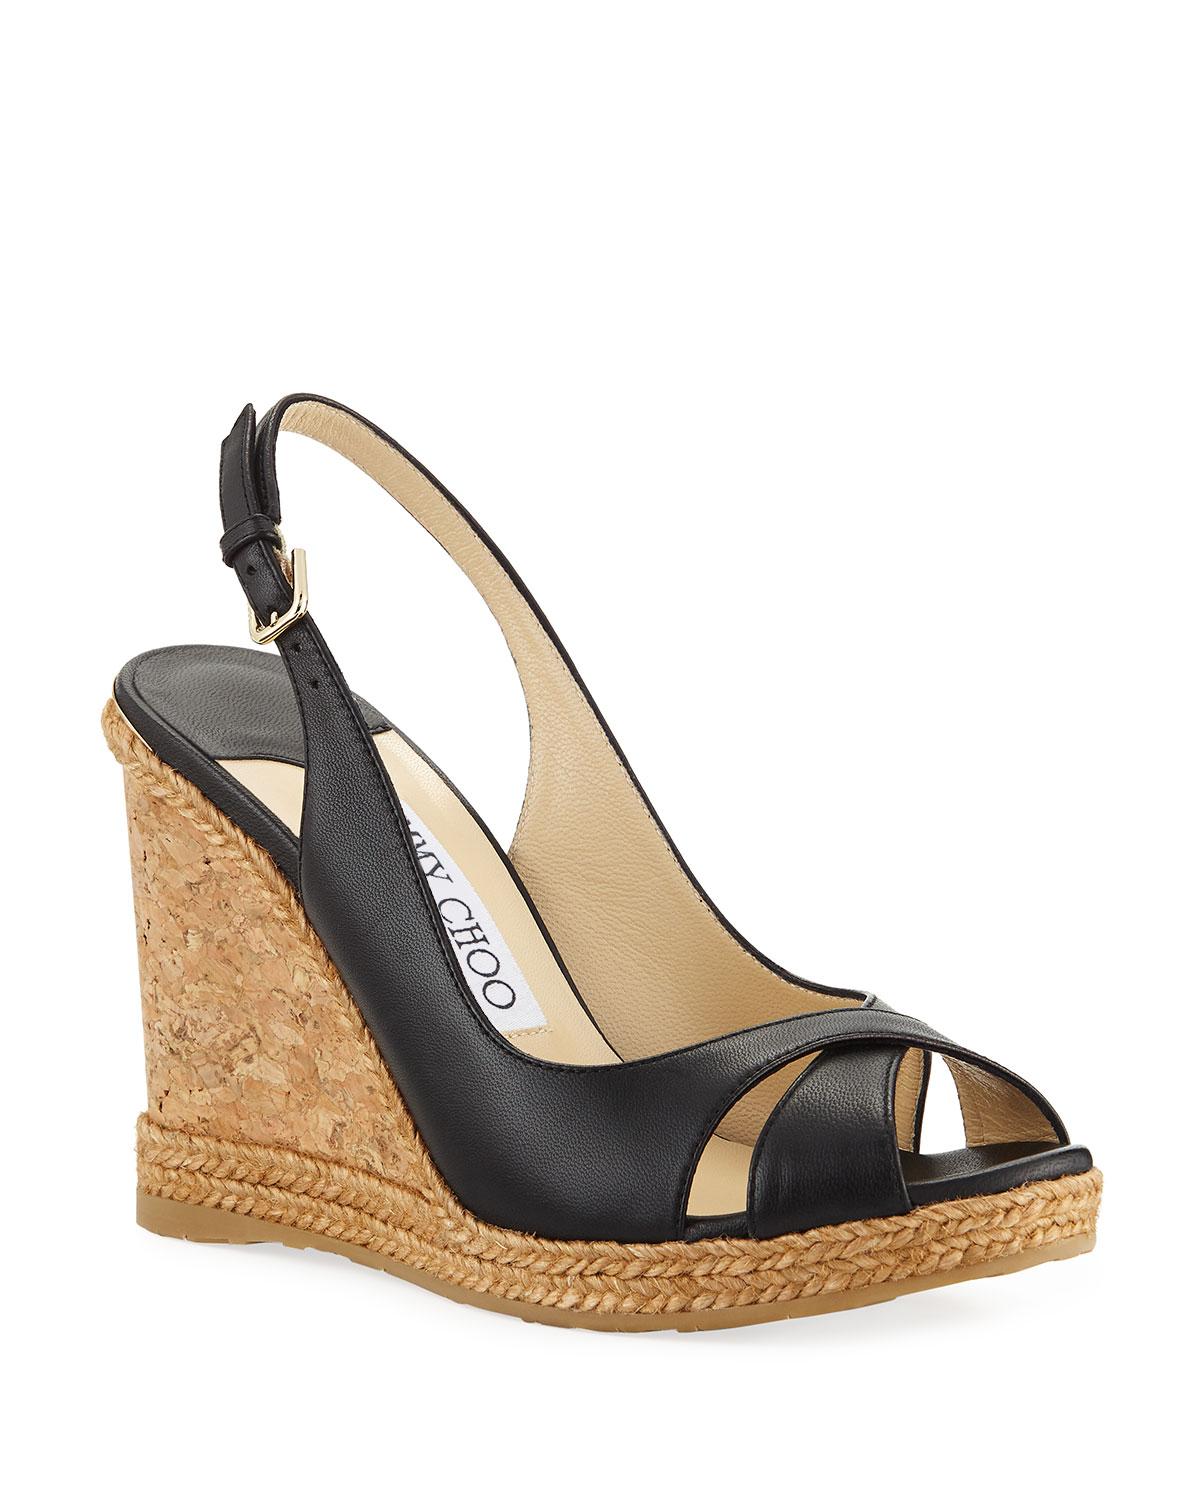 Jimmy Choo Amely 105mm Leather Cork Wedge Sandals in Black - Save 60% ...